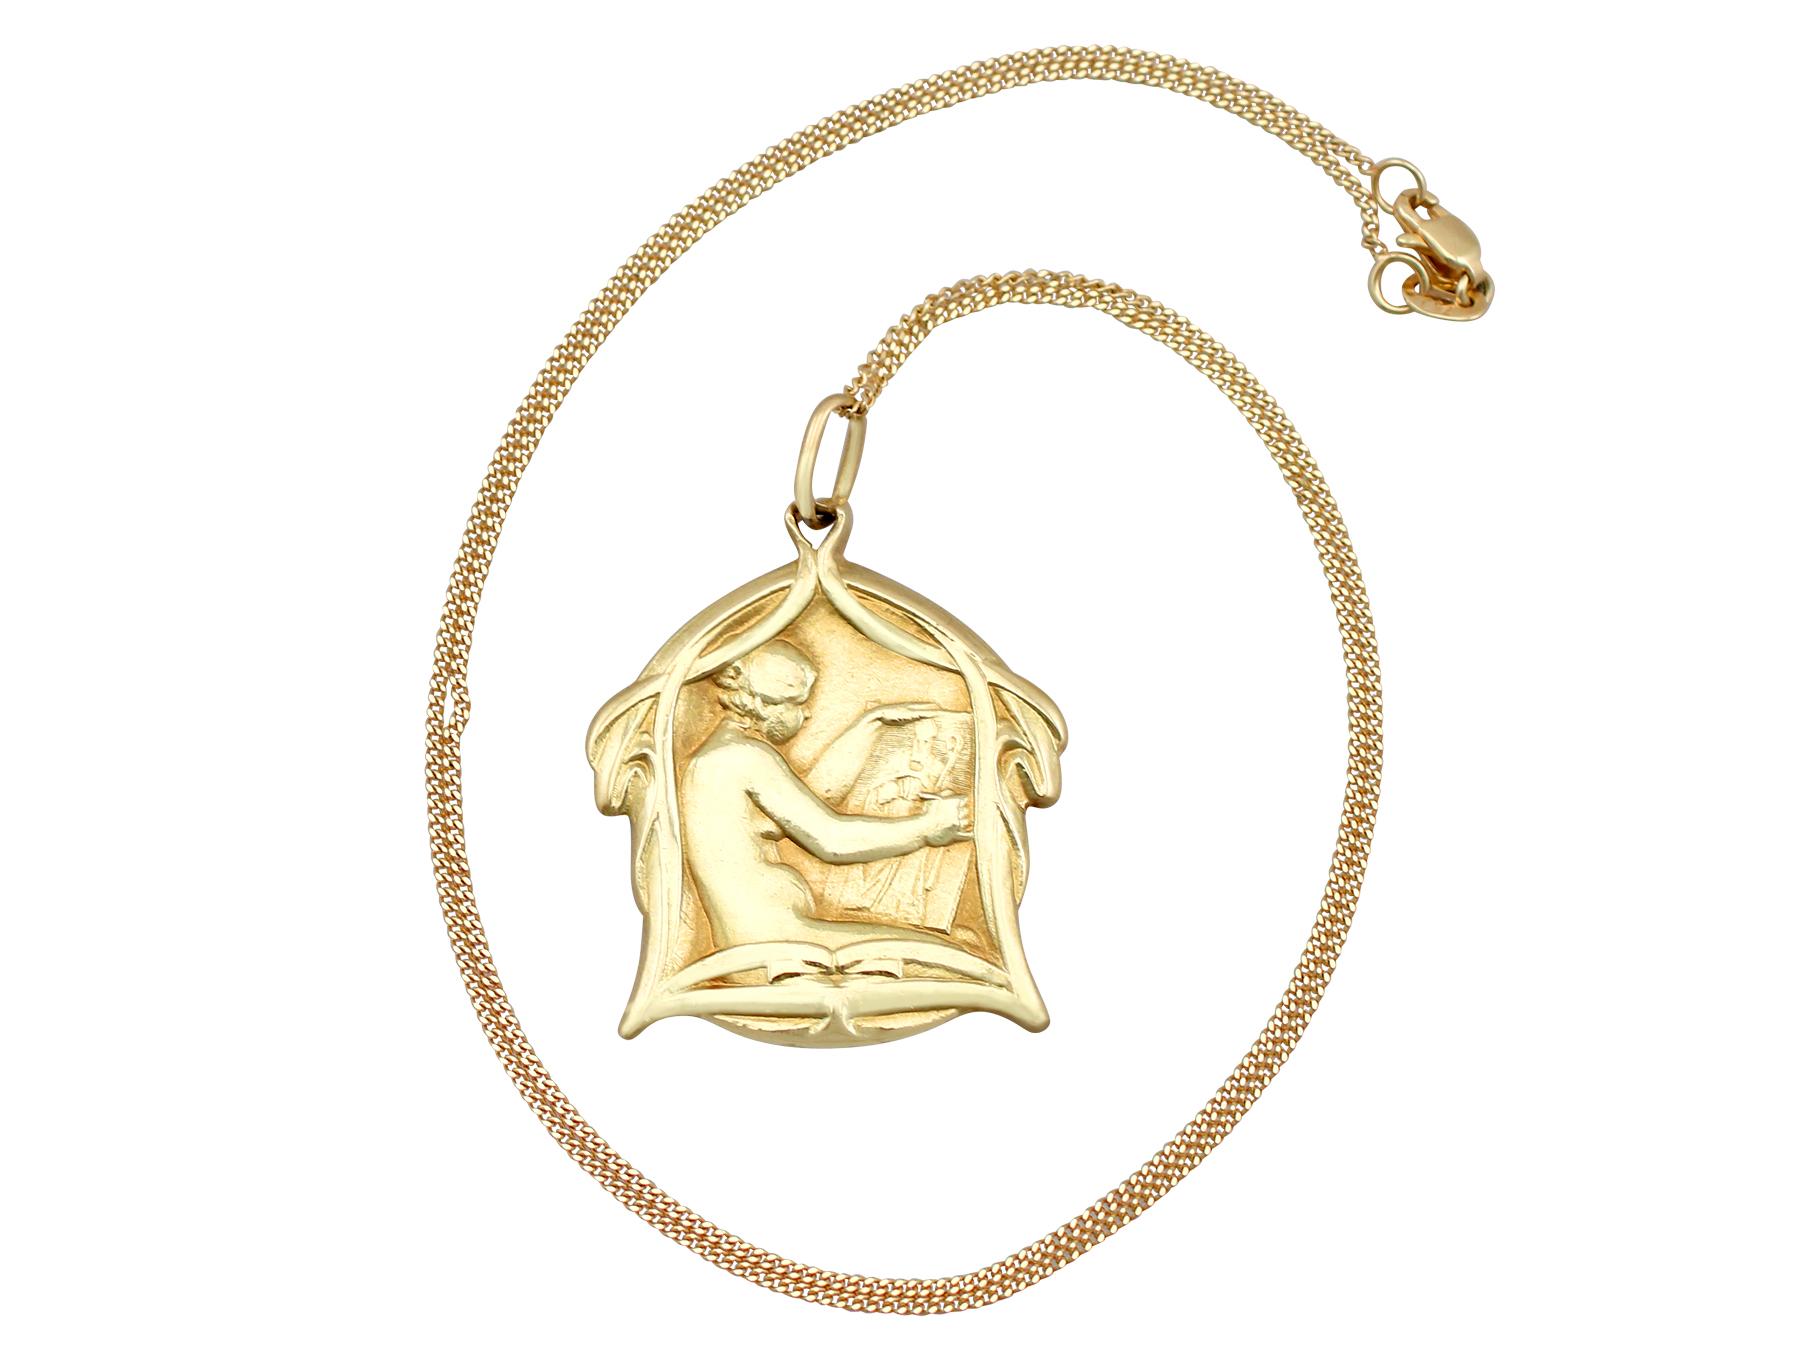 An impressive antique Belgian 18 karat yellow gold Art Nouveau pendant and chain by 'Fernan Du Bois'; part of our diverse antique jewelry and estate jewelry collections.

This fine and impressive antique Belgian pendant has been crafted in 18k